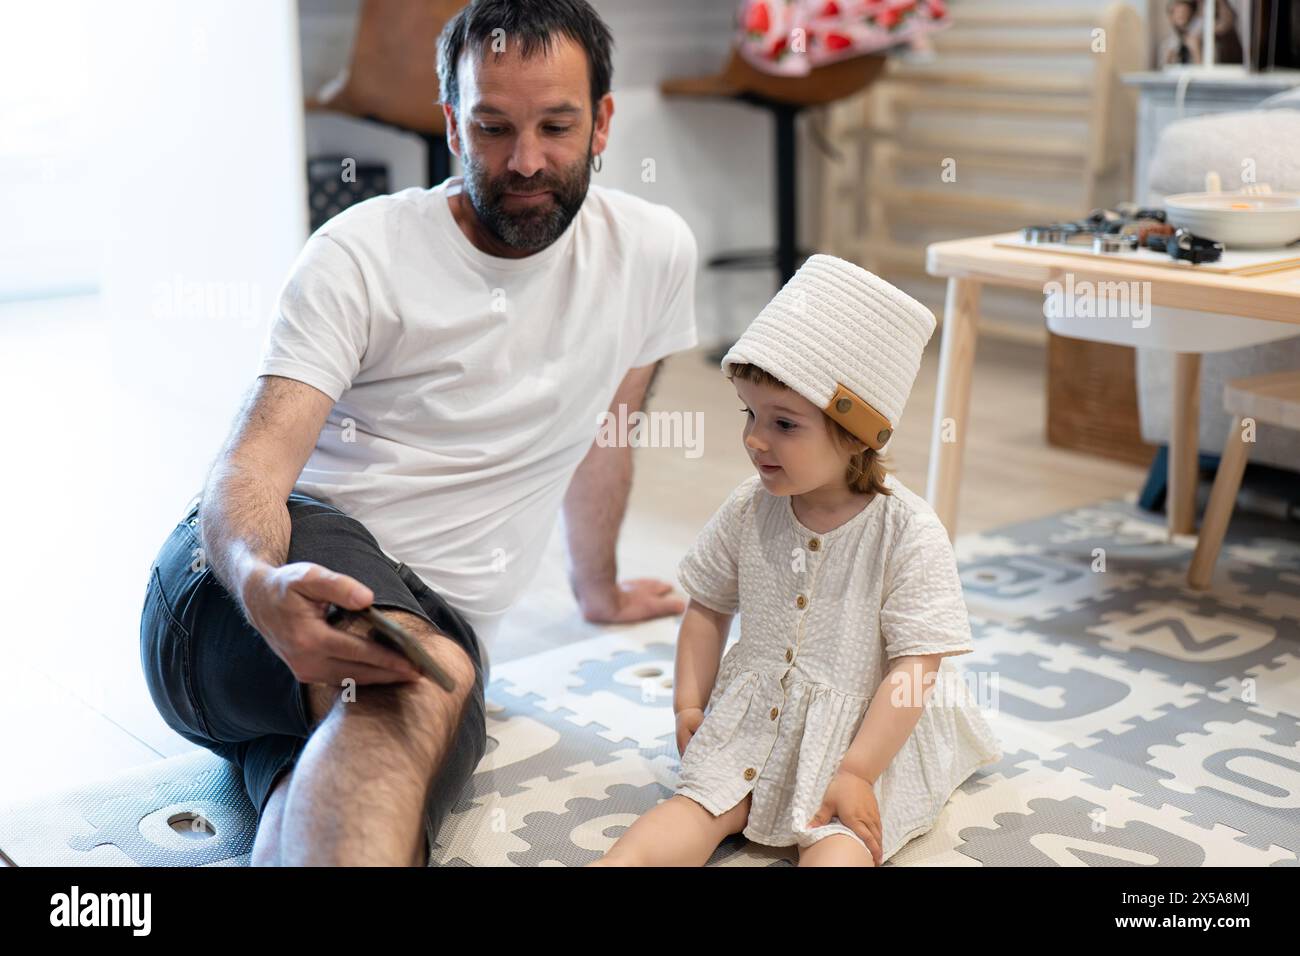 A father sits on the floor showing something to his young daughter who is attentively looking on Stock Photo